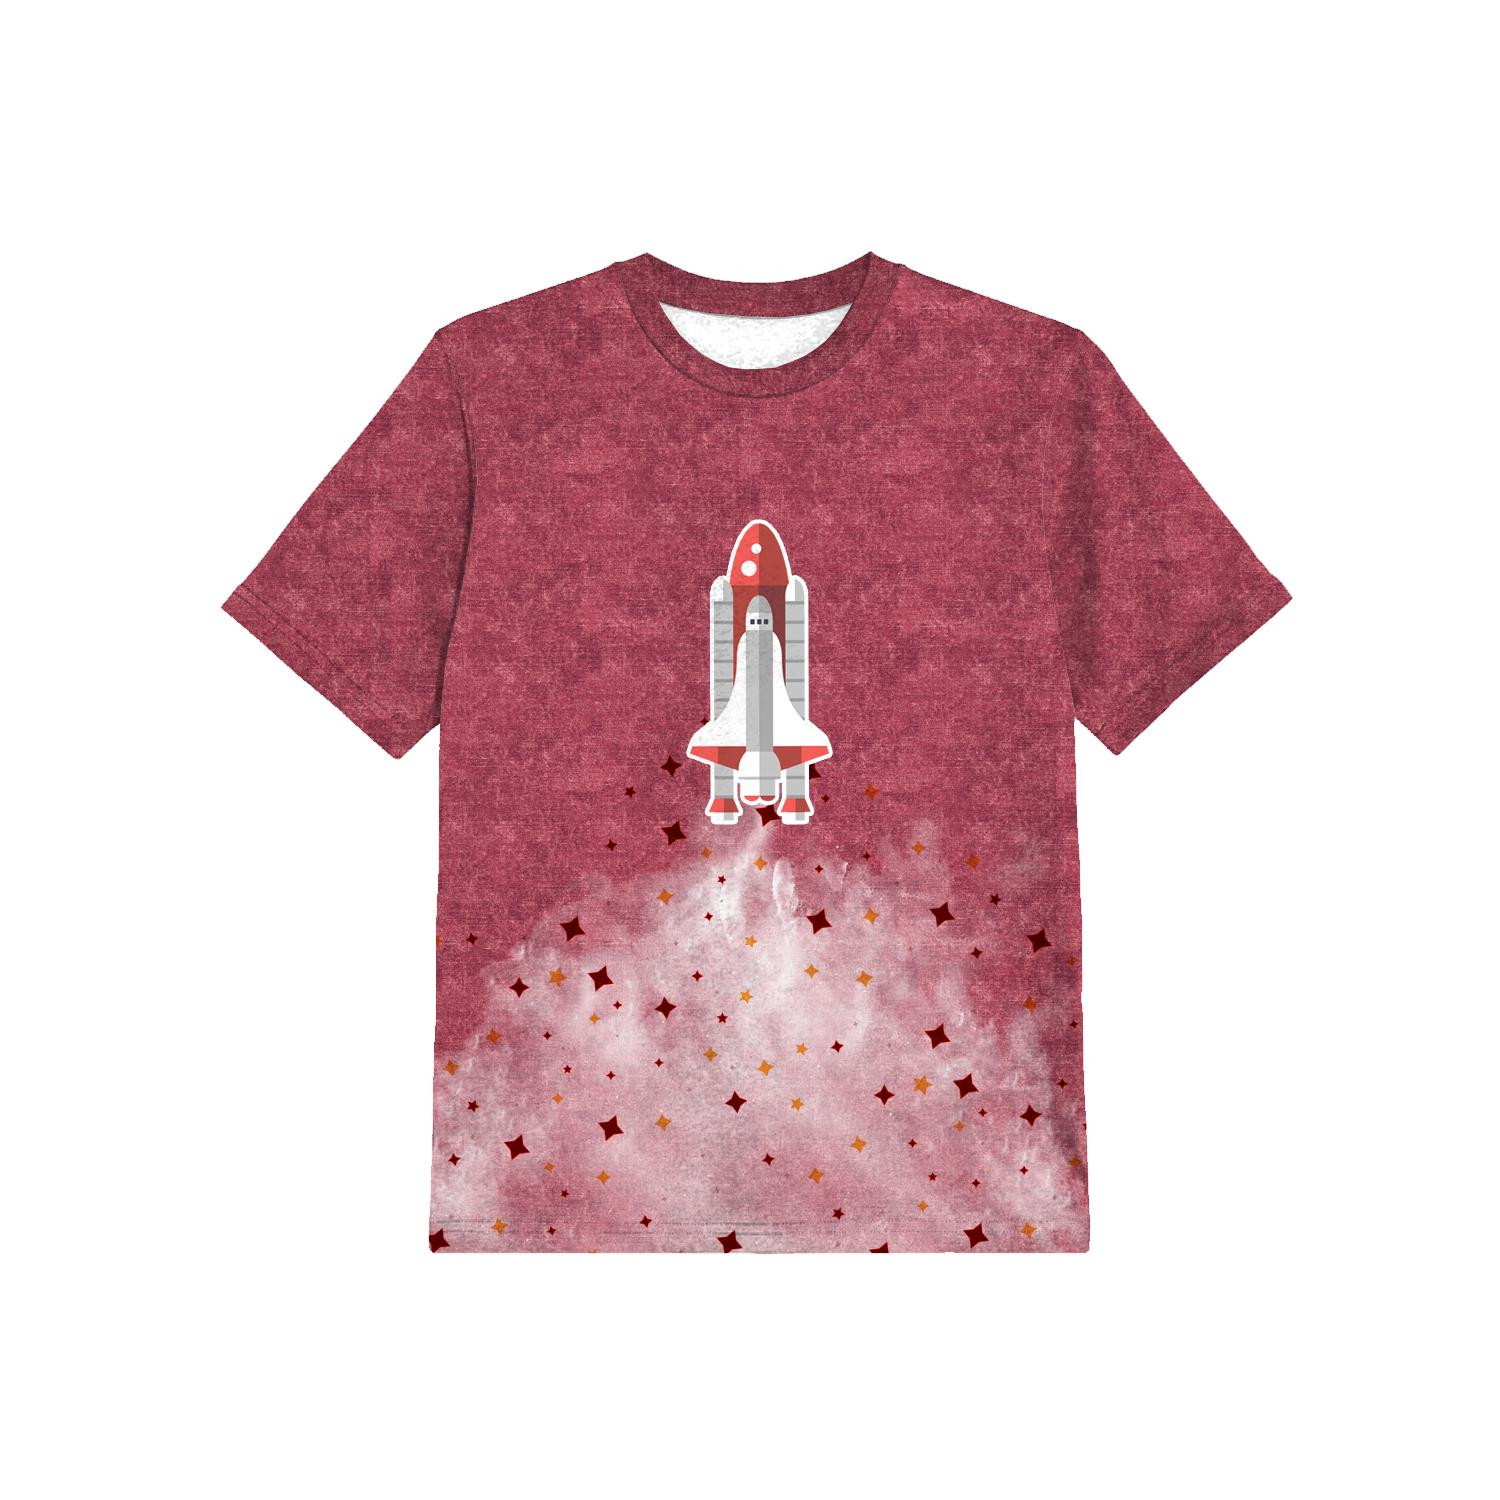 KID’S T-SHIRT - SPACESHIP (SPACE EXPEDITION) / ACID WASH MAROON - single jersey